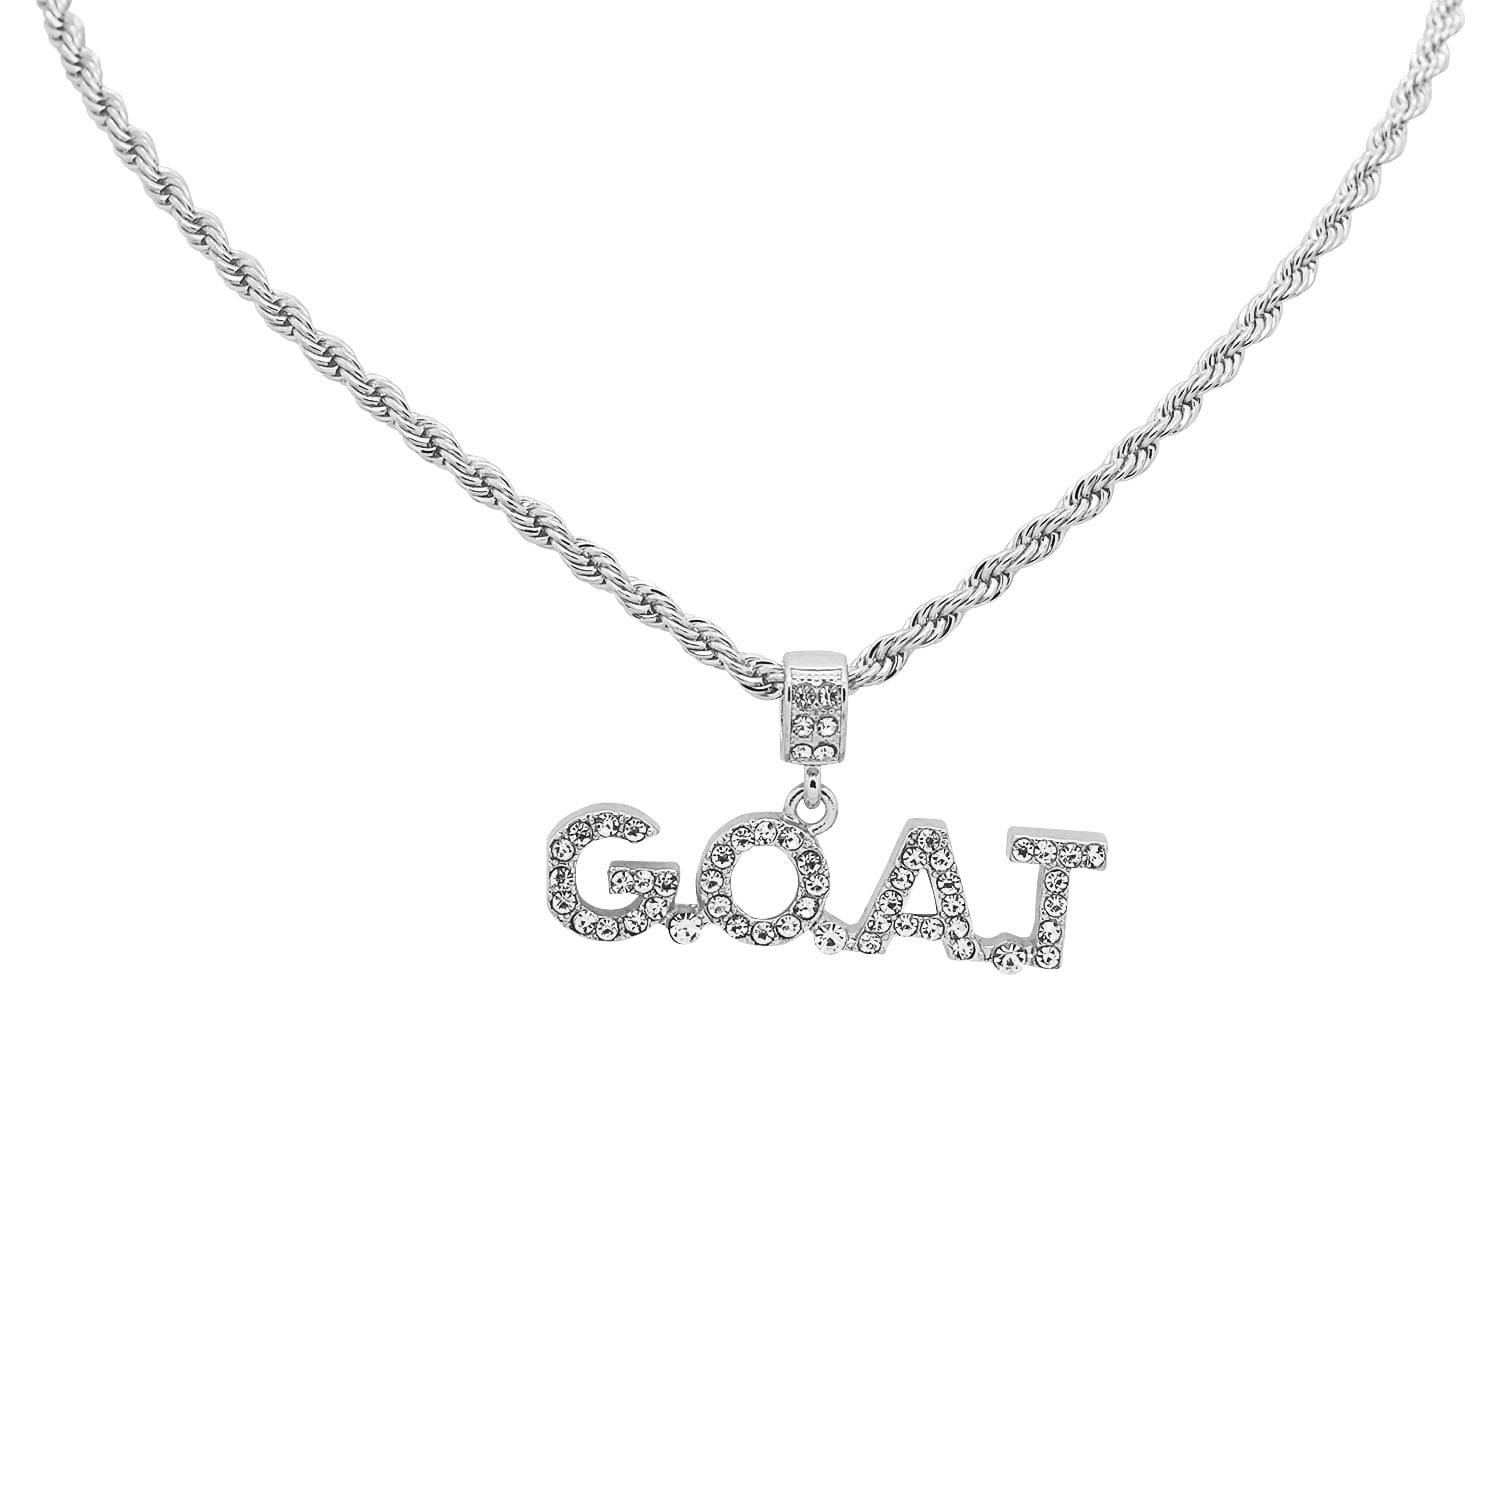 White Gold-Tone Hip Hop Bling Simulated Crystal CursiveHustle Letter Pendant with 24 Tennis Chain and 24 Rope Chain 